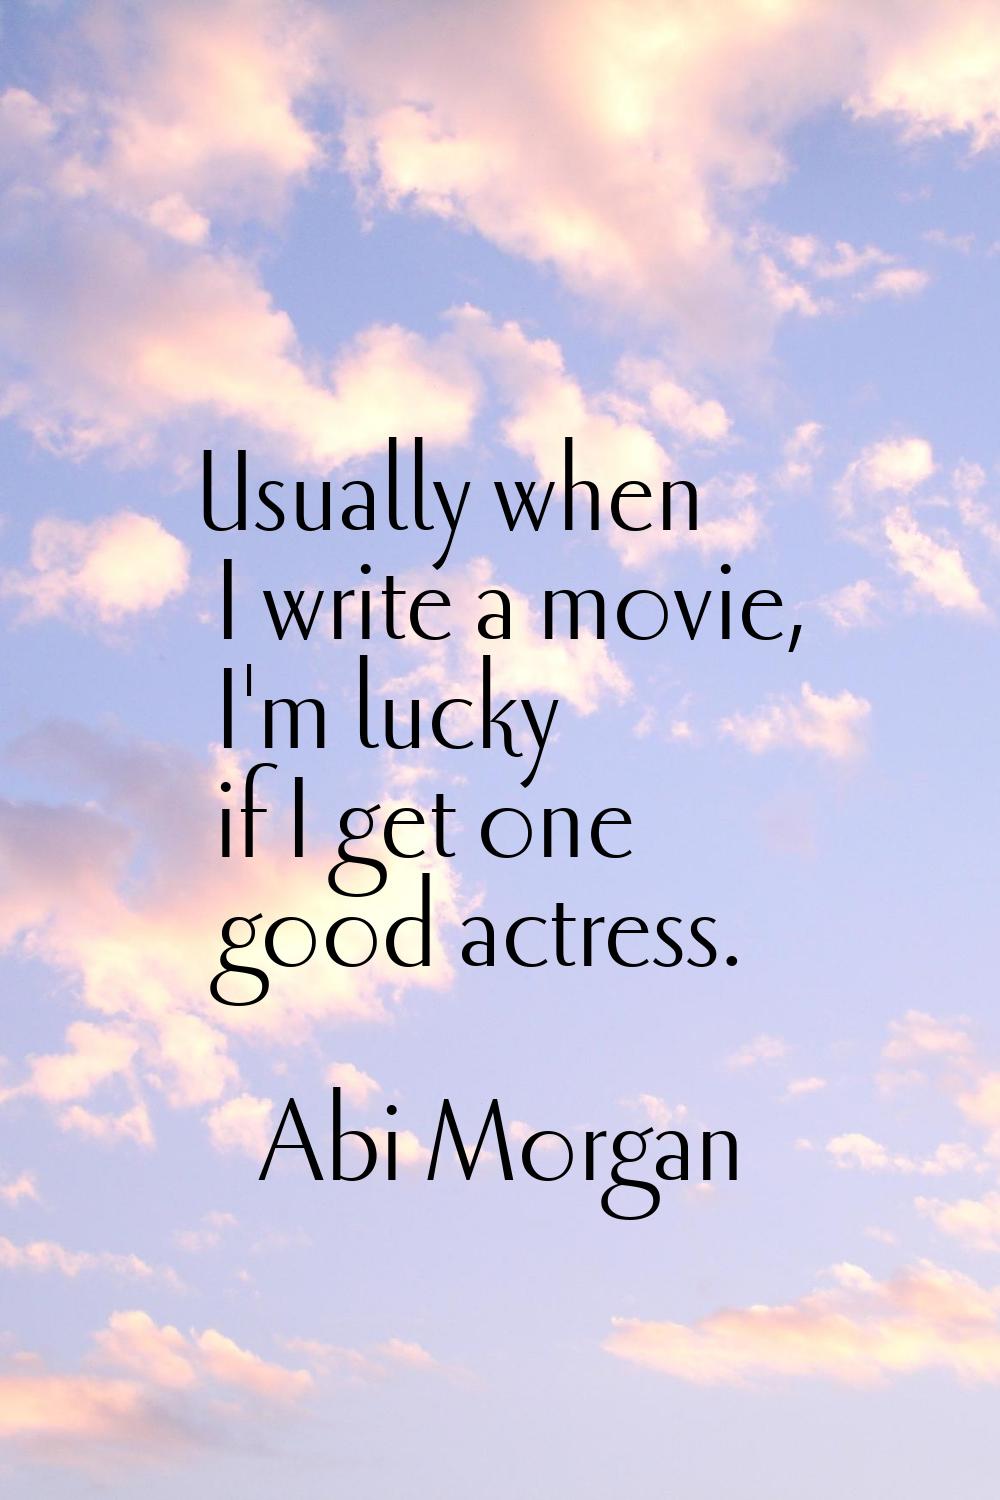 Usually when I write a movie, I'm lucky if I get one good actress.